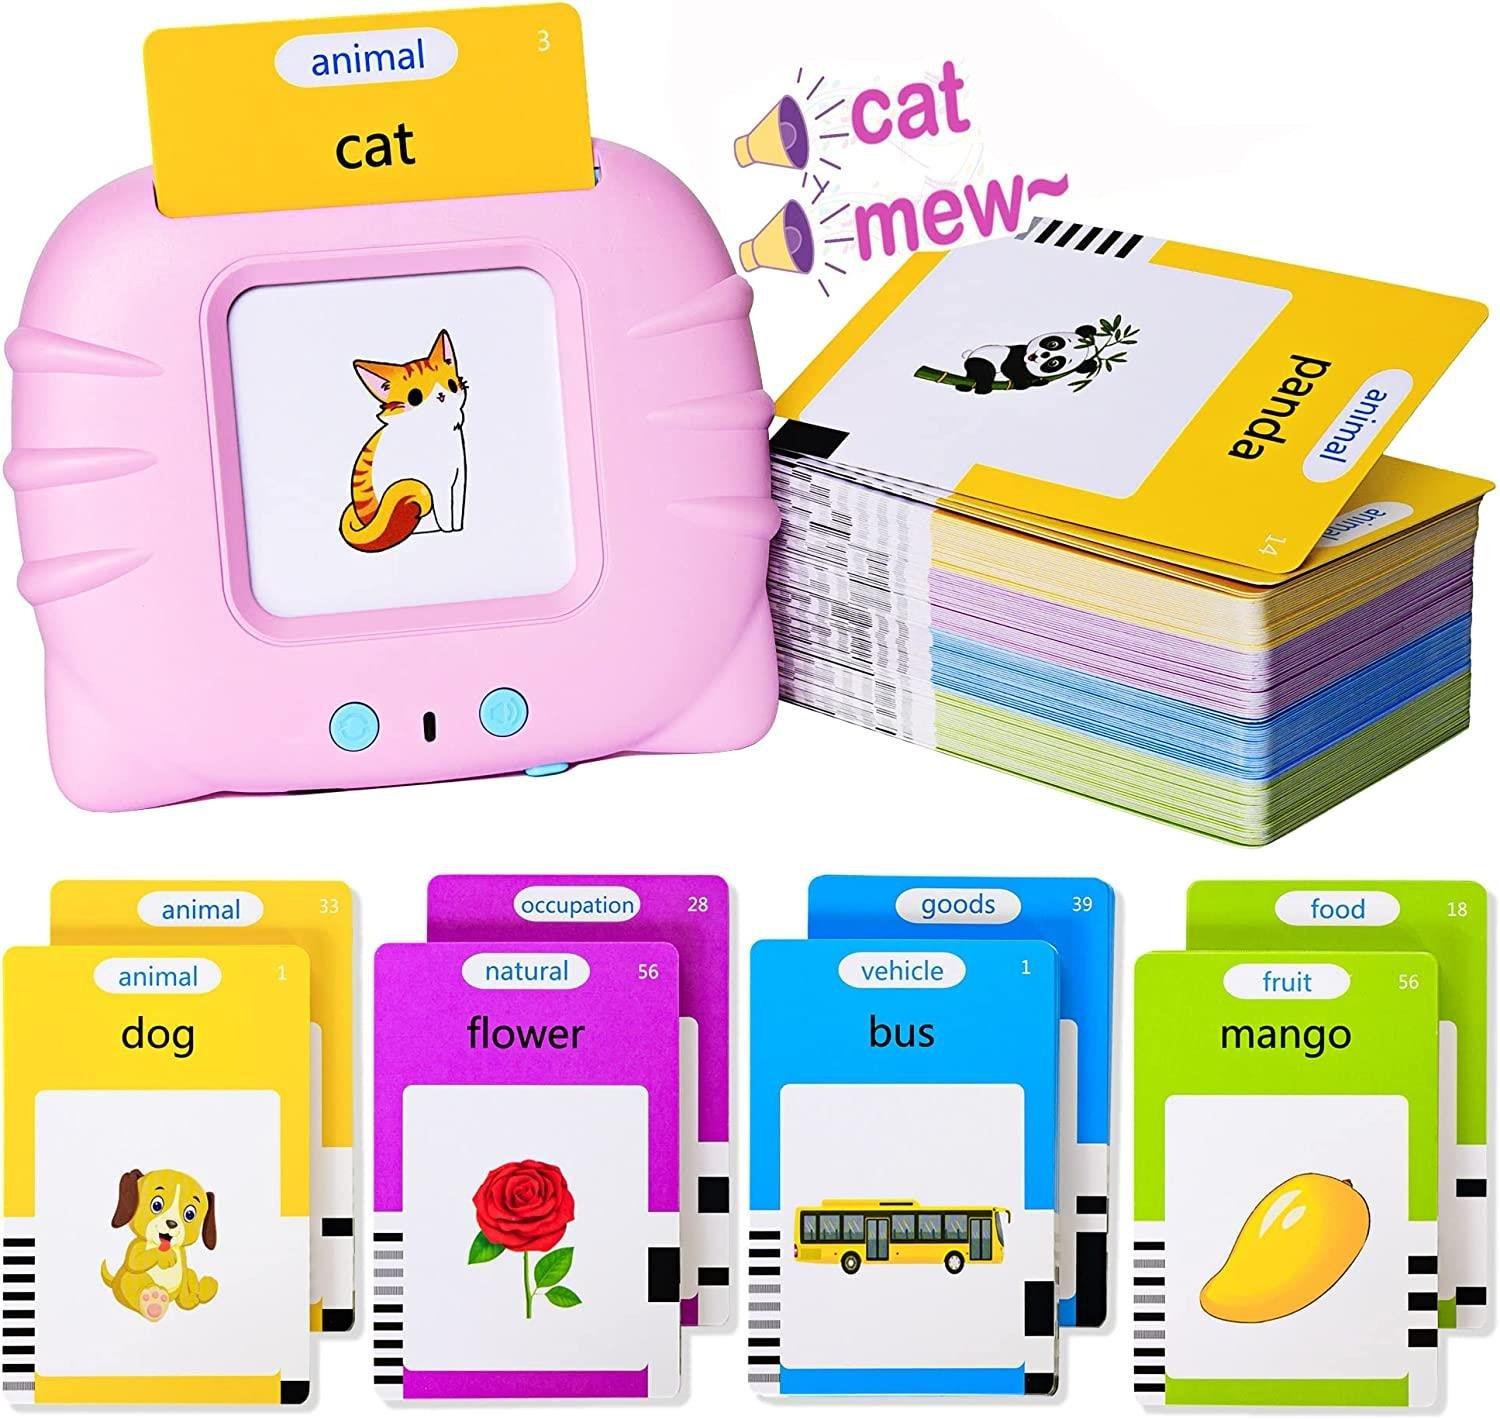 Talking Flash Cards Early Learning Toy for Toddlers with 224 Cards